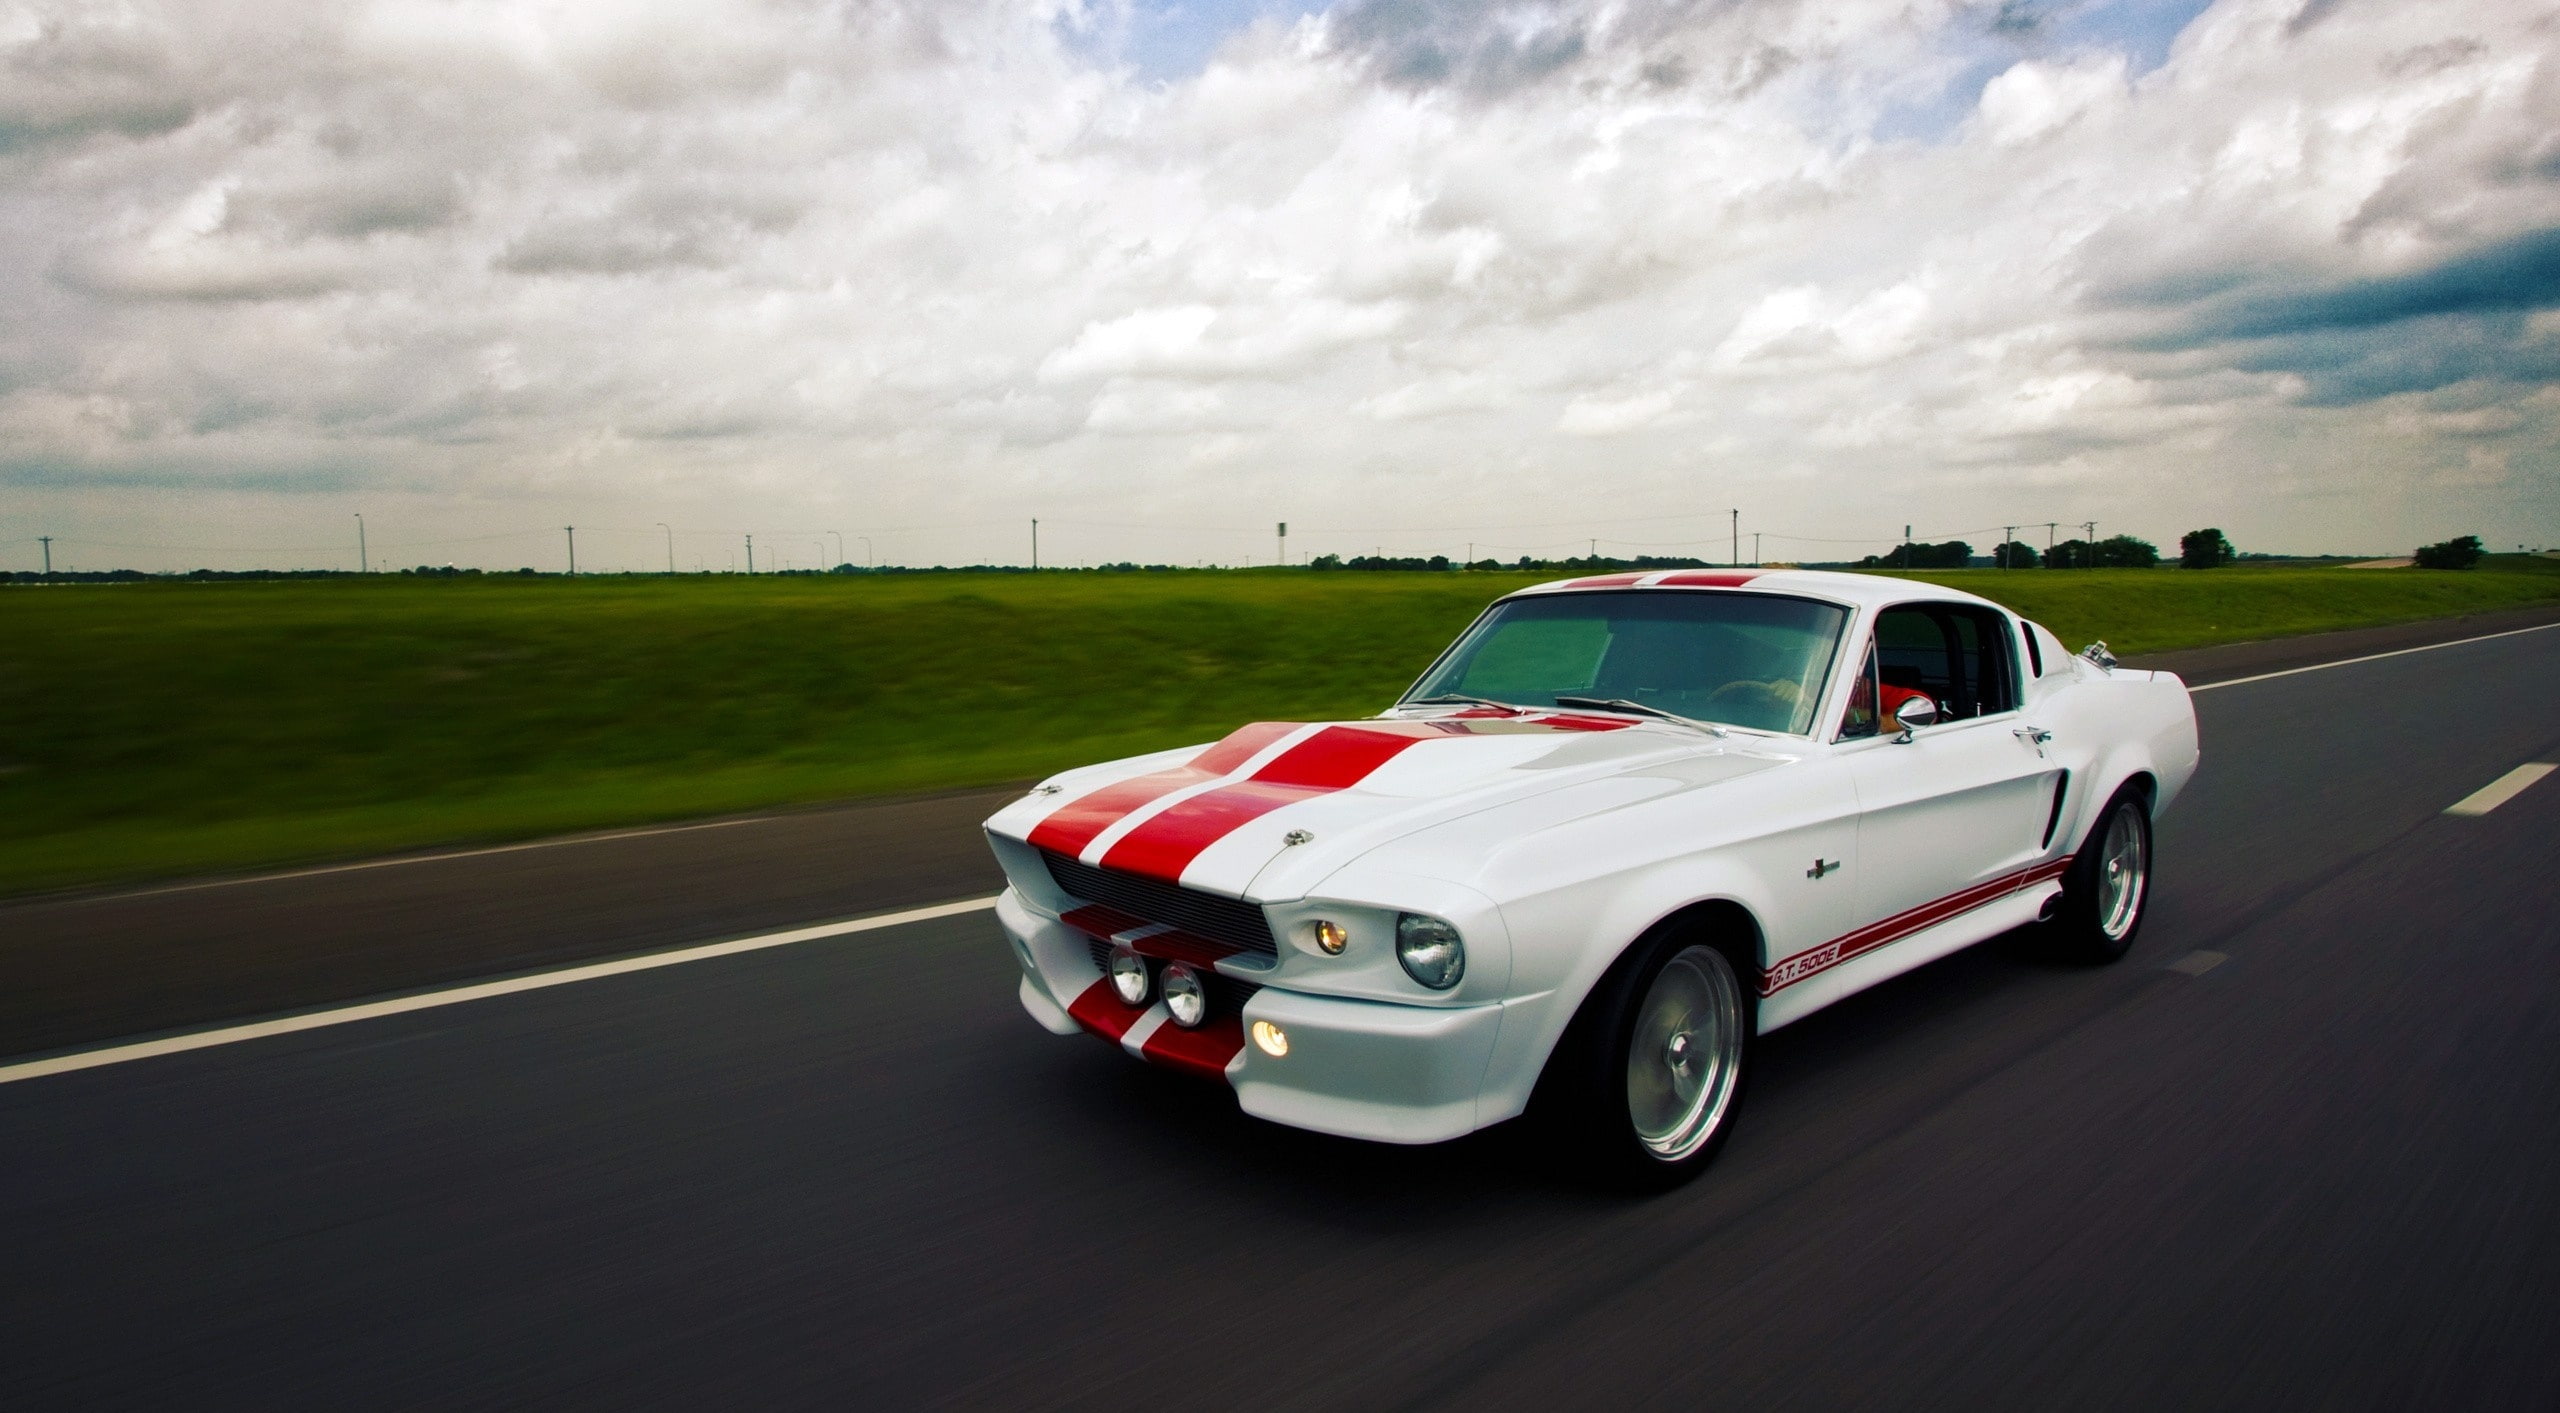 Ford Mustang Shelby GT500 Eleanor, white and red Ford Mustang Mach 1